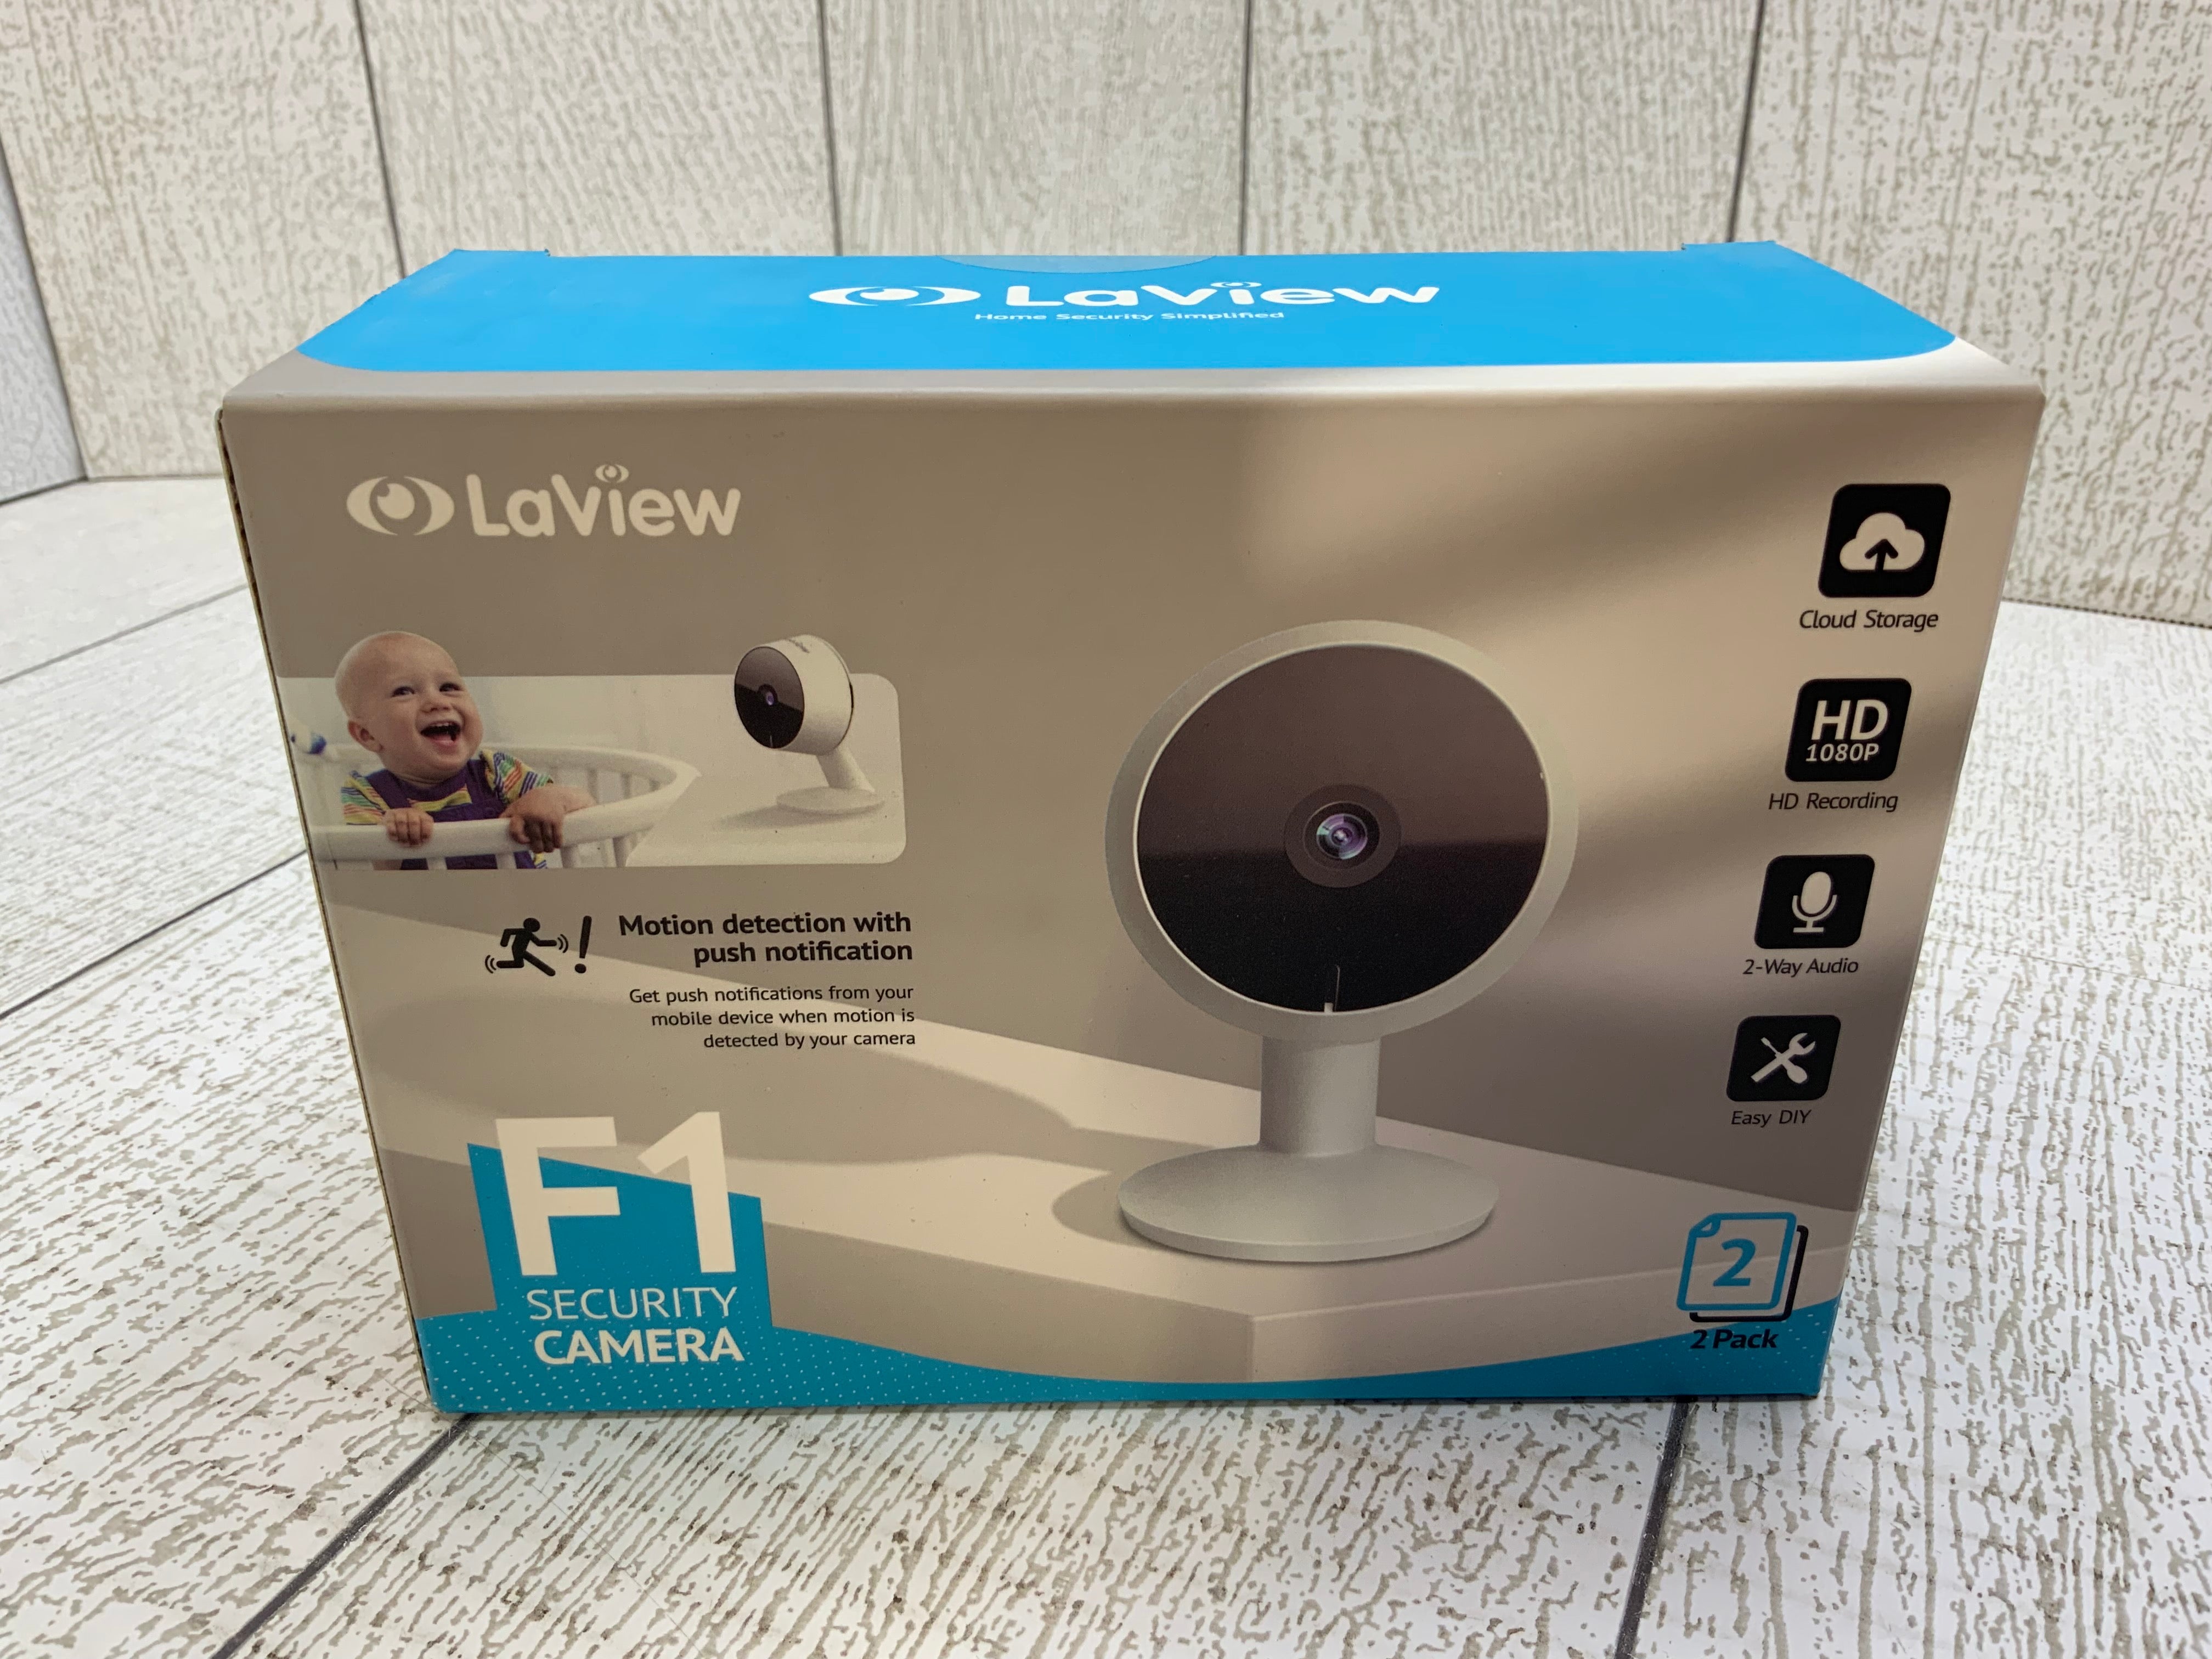 Laview Security Camera HD 1080P(2 Pack),Baby Monitor Motion Detection (7953518788846)